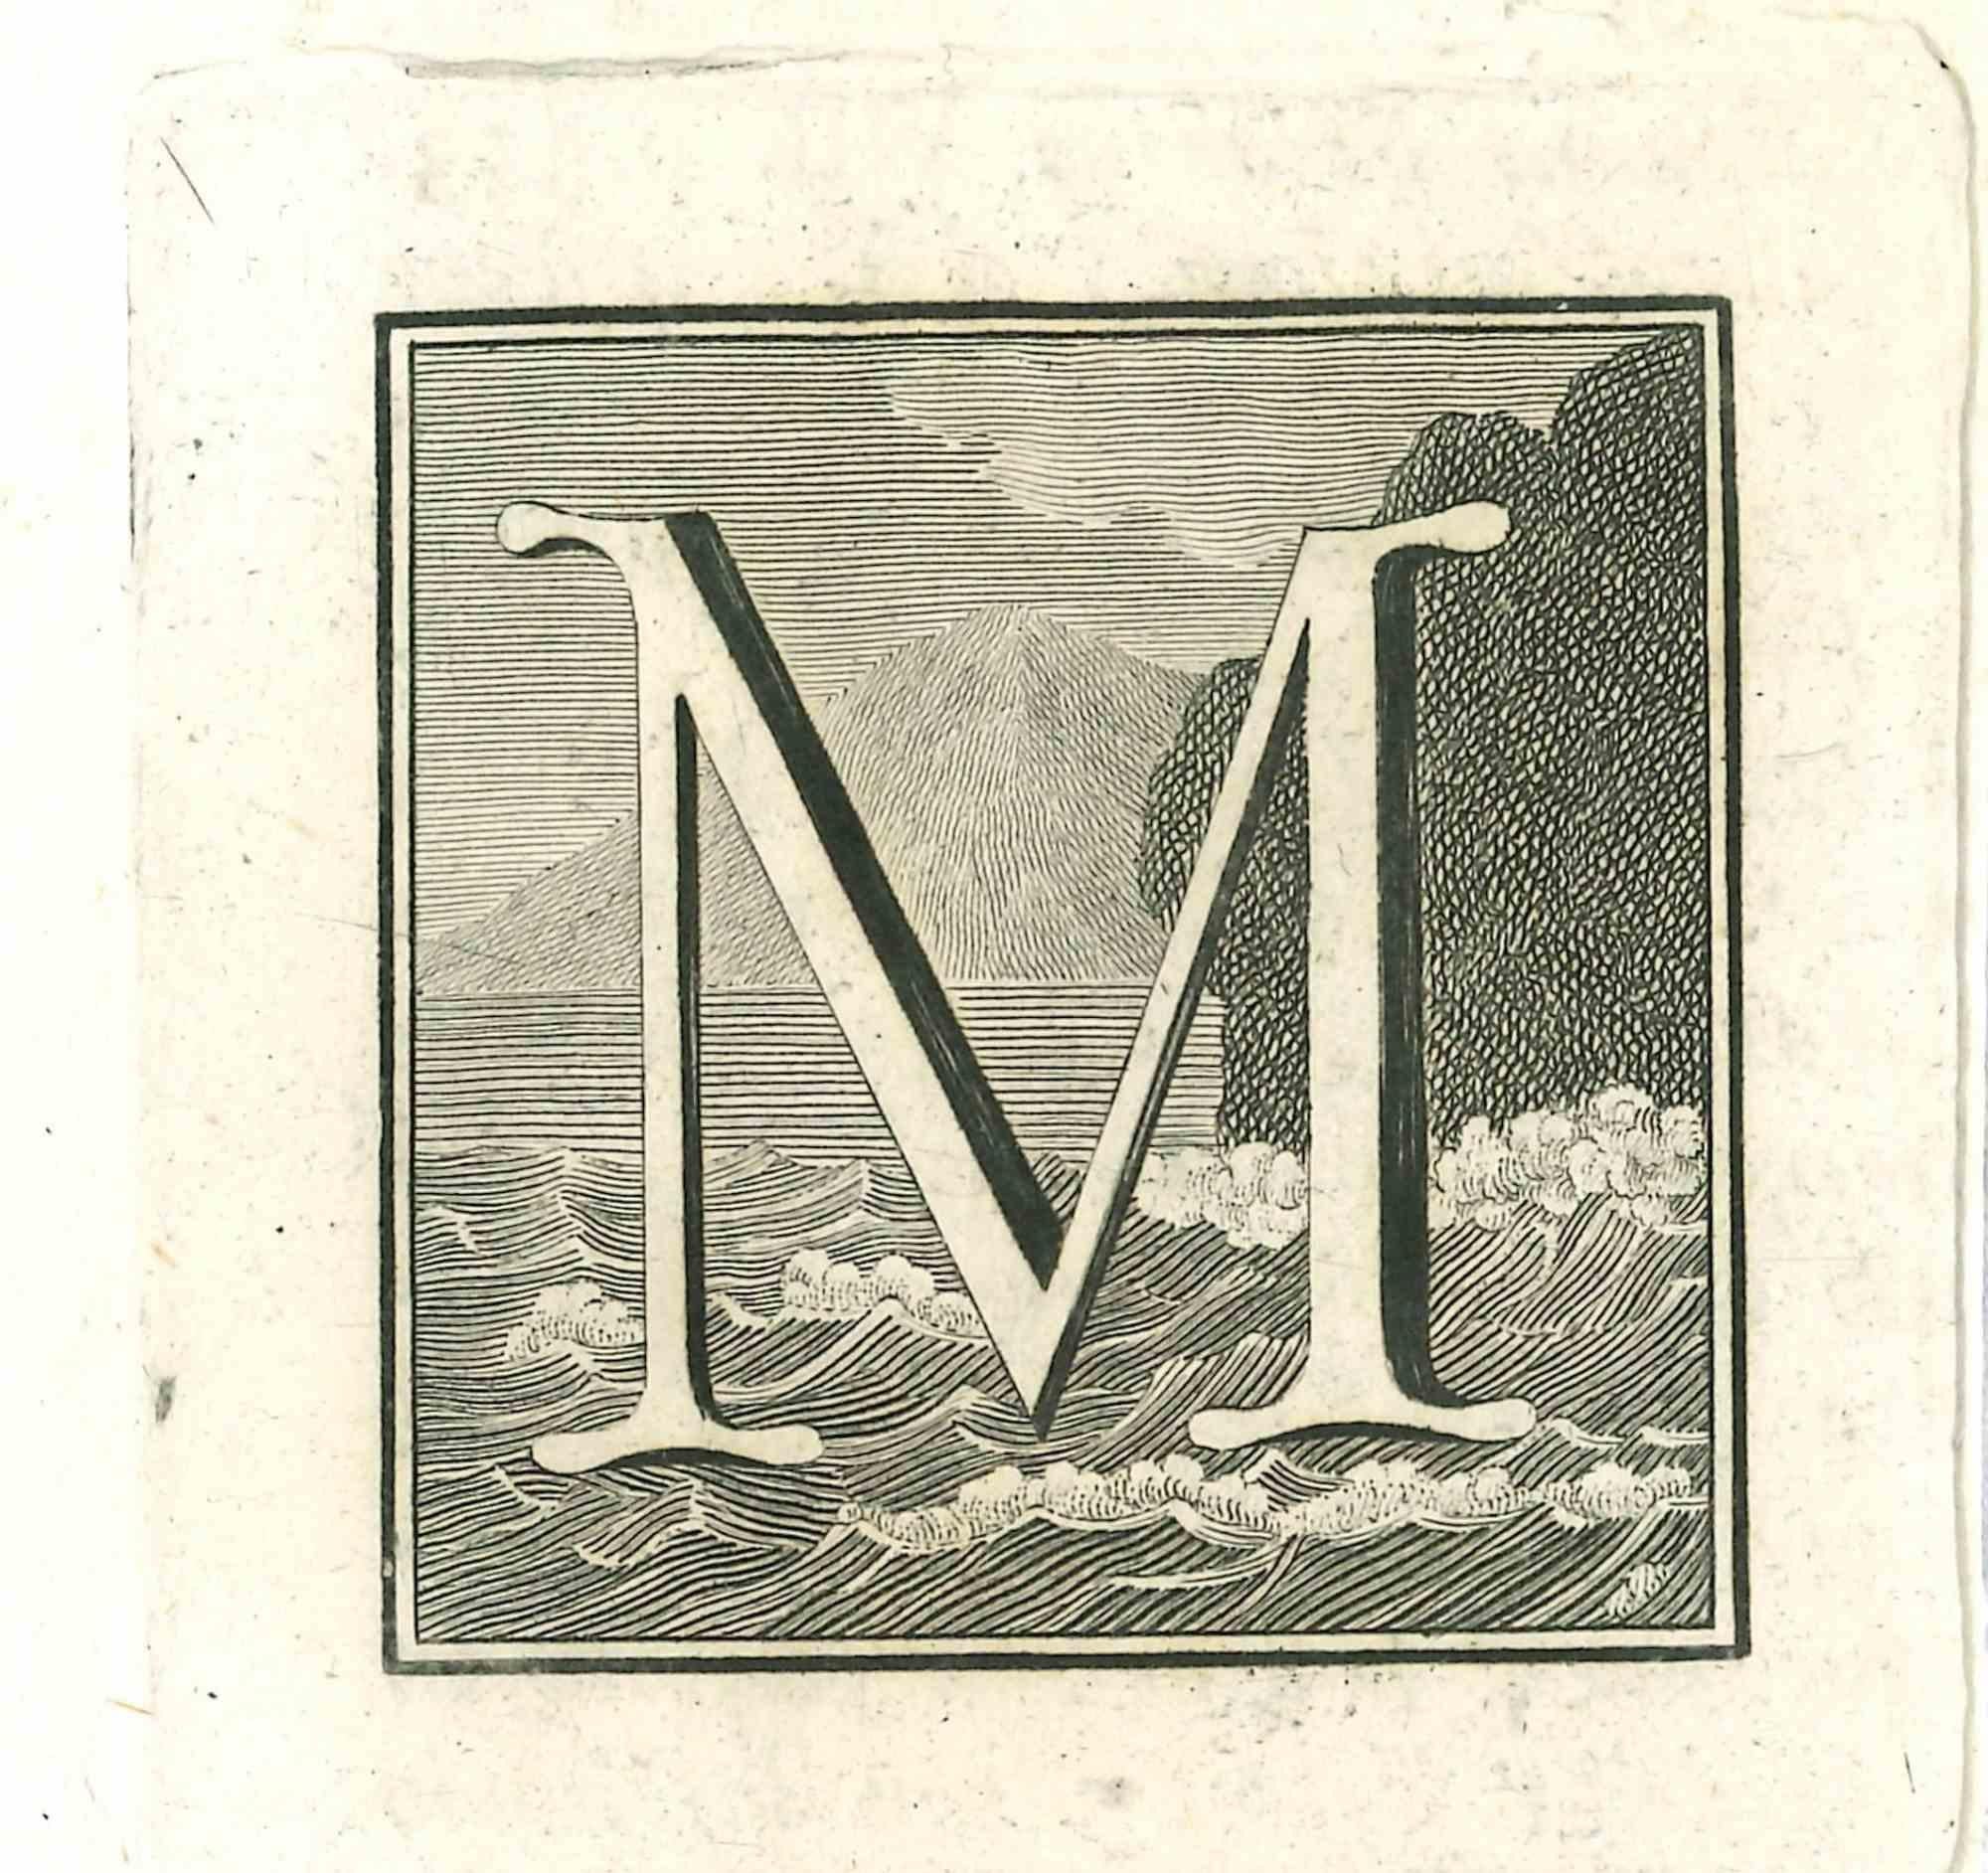 Unknown Figurative Print - Capital Letter M for the Antiquities of Herculaneum Exposed-Etching-18th Century